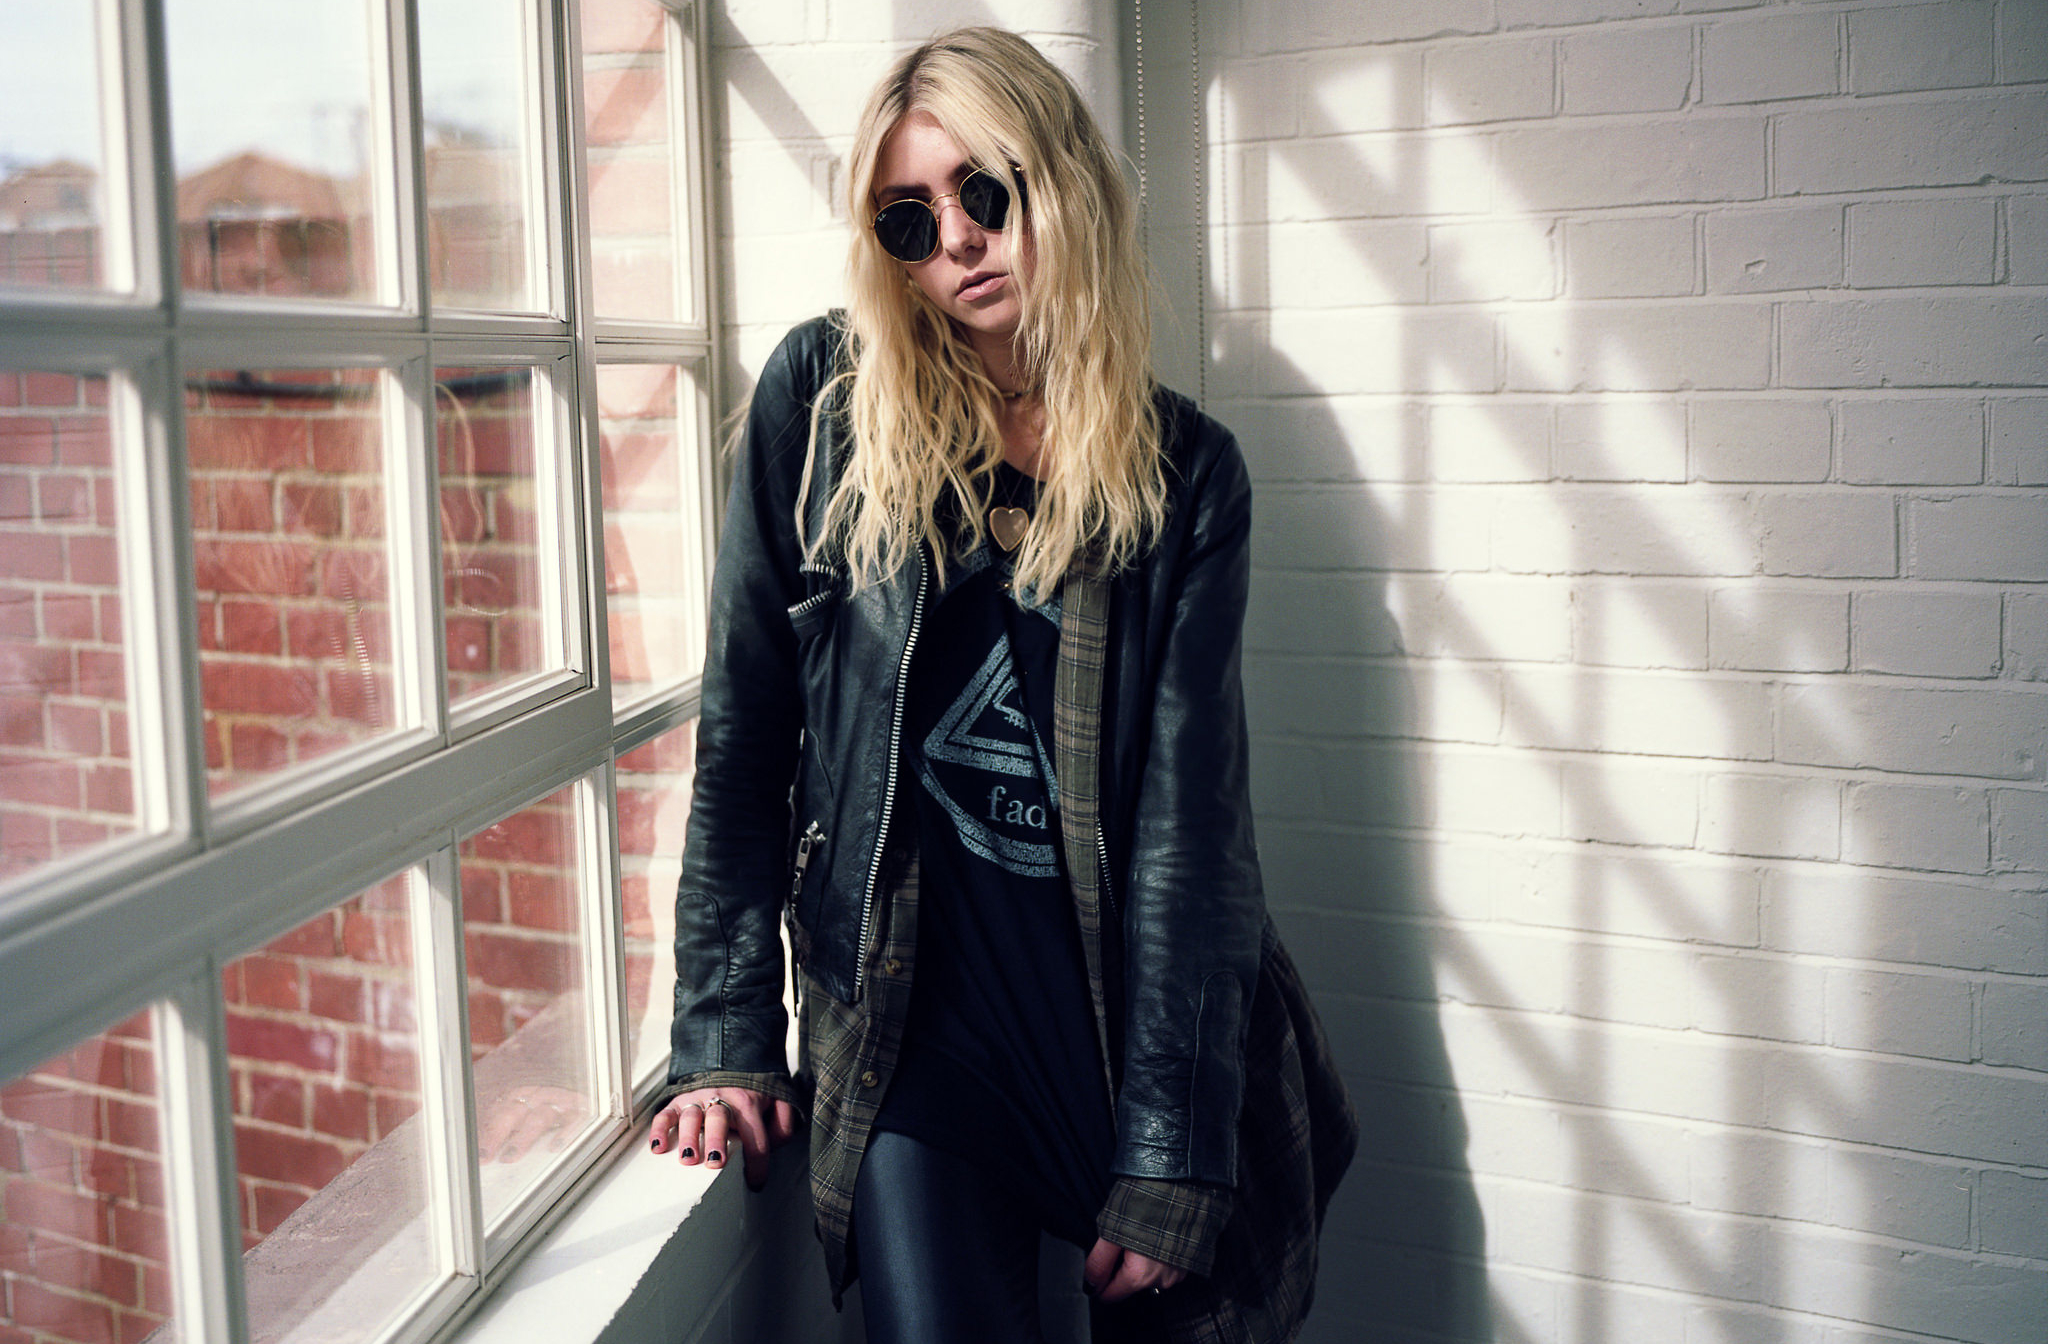 The Pretty Reckless Music Women Celebrity Actress Singer Songwriters Blond Hair Leather Jackets Glas 2048x1344